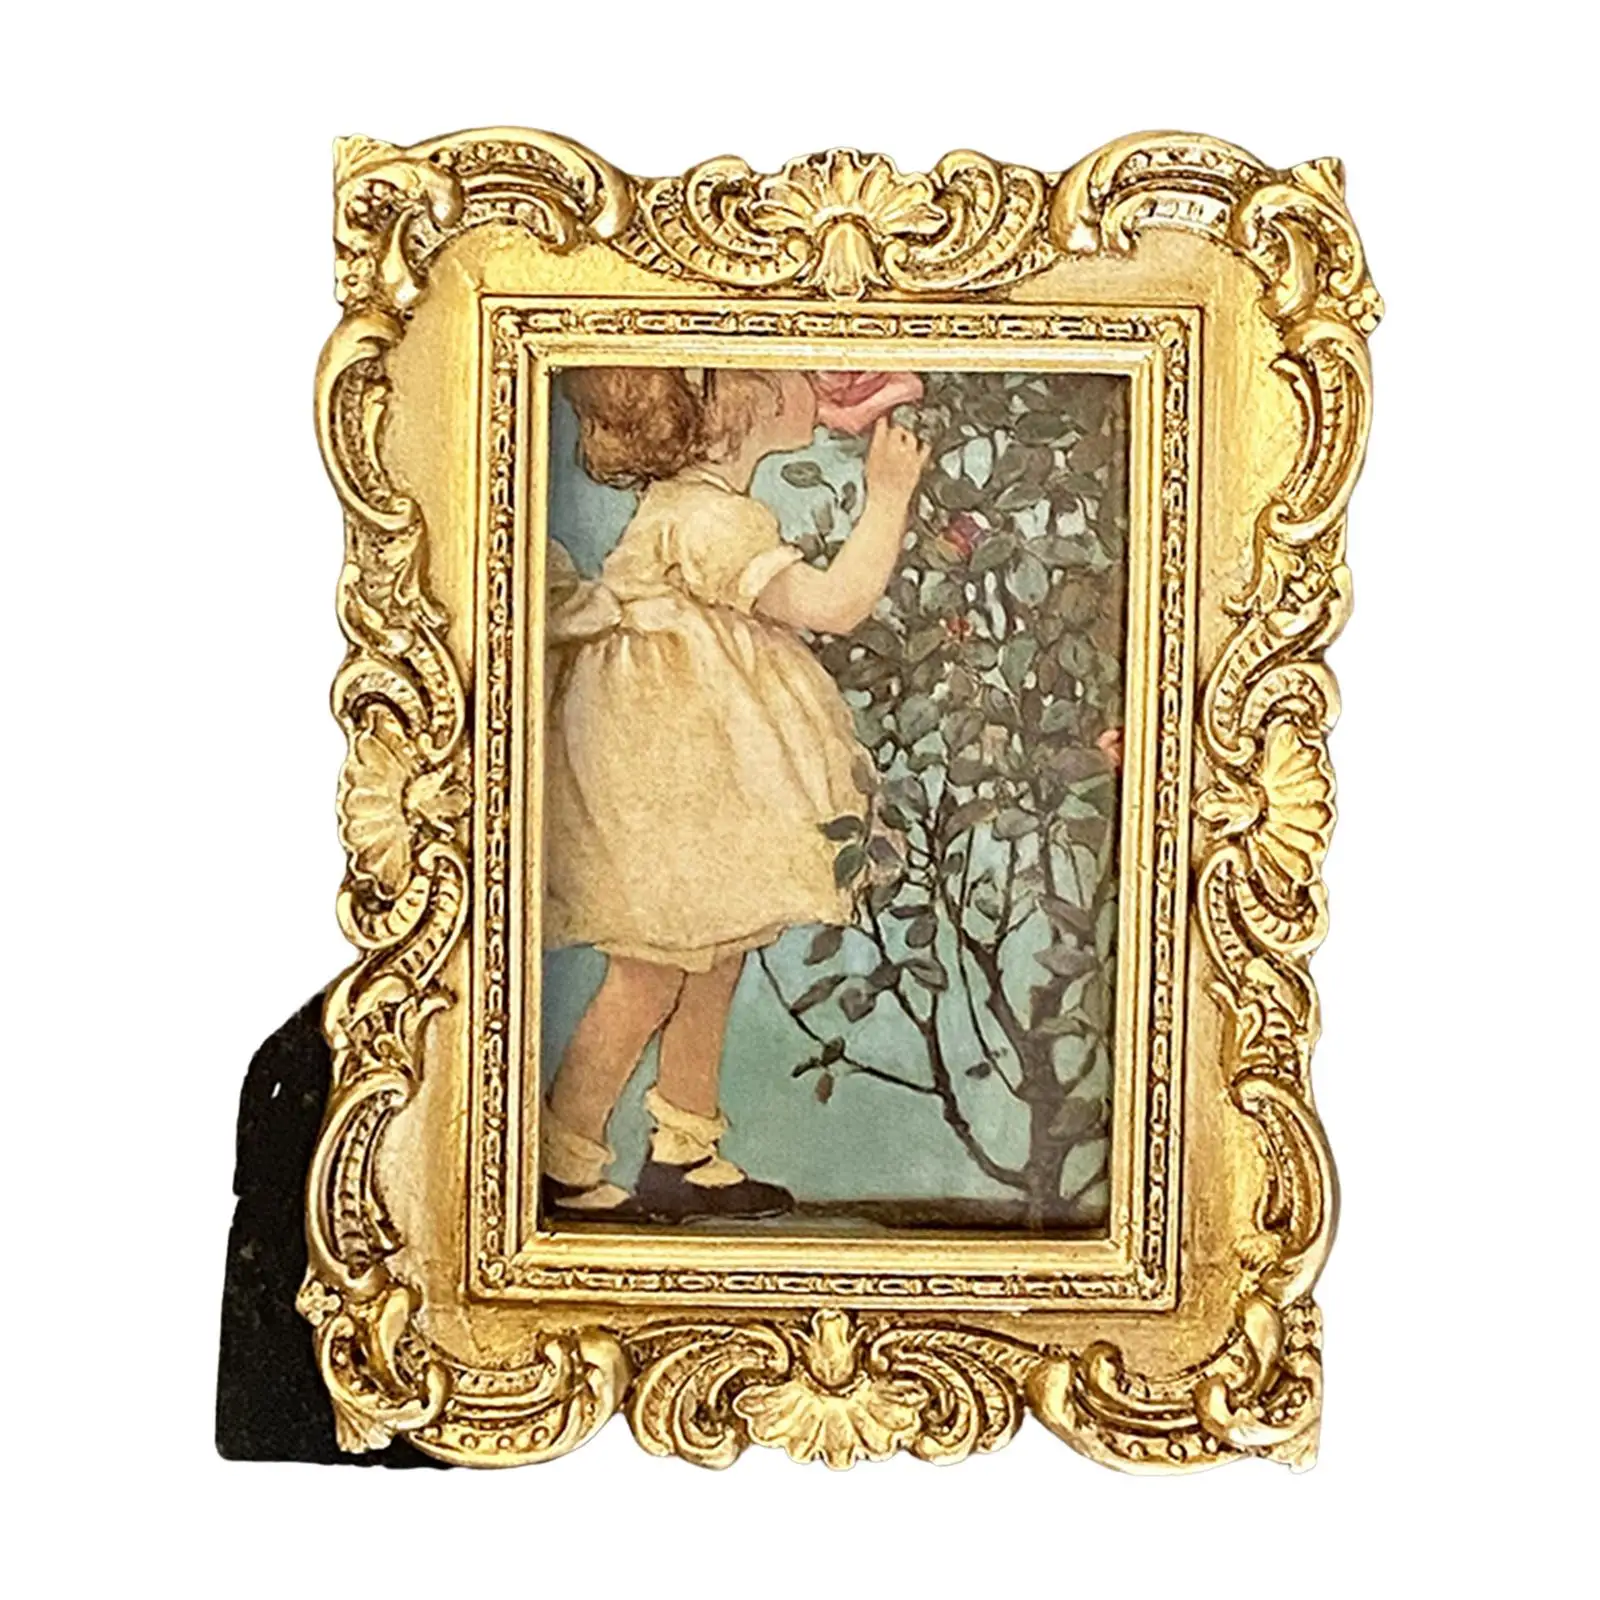 Antique Photo Frame Photo Gallery Art European Style Ornate Golden Carved Resin Small Vintage Picture Frame for Home Decoration